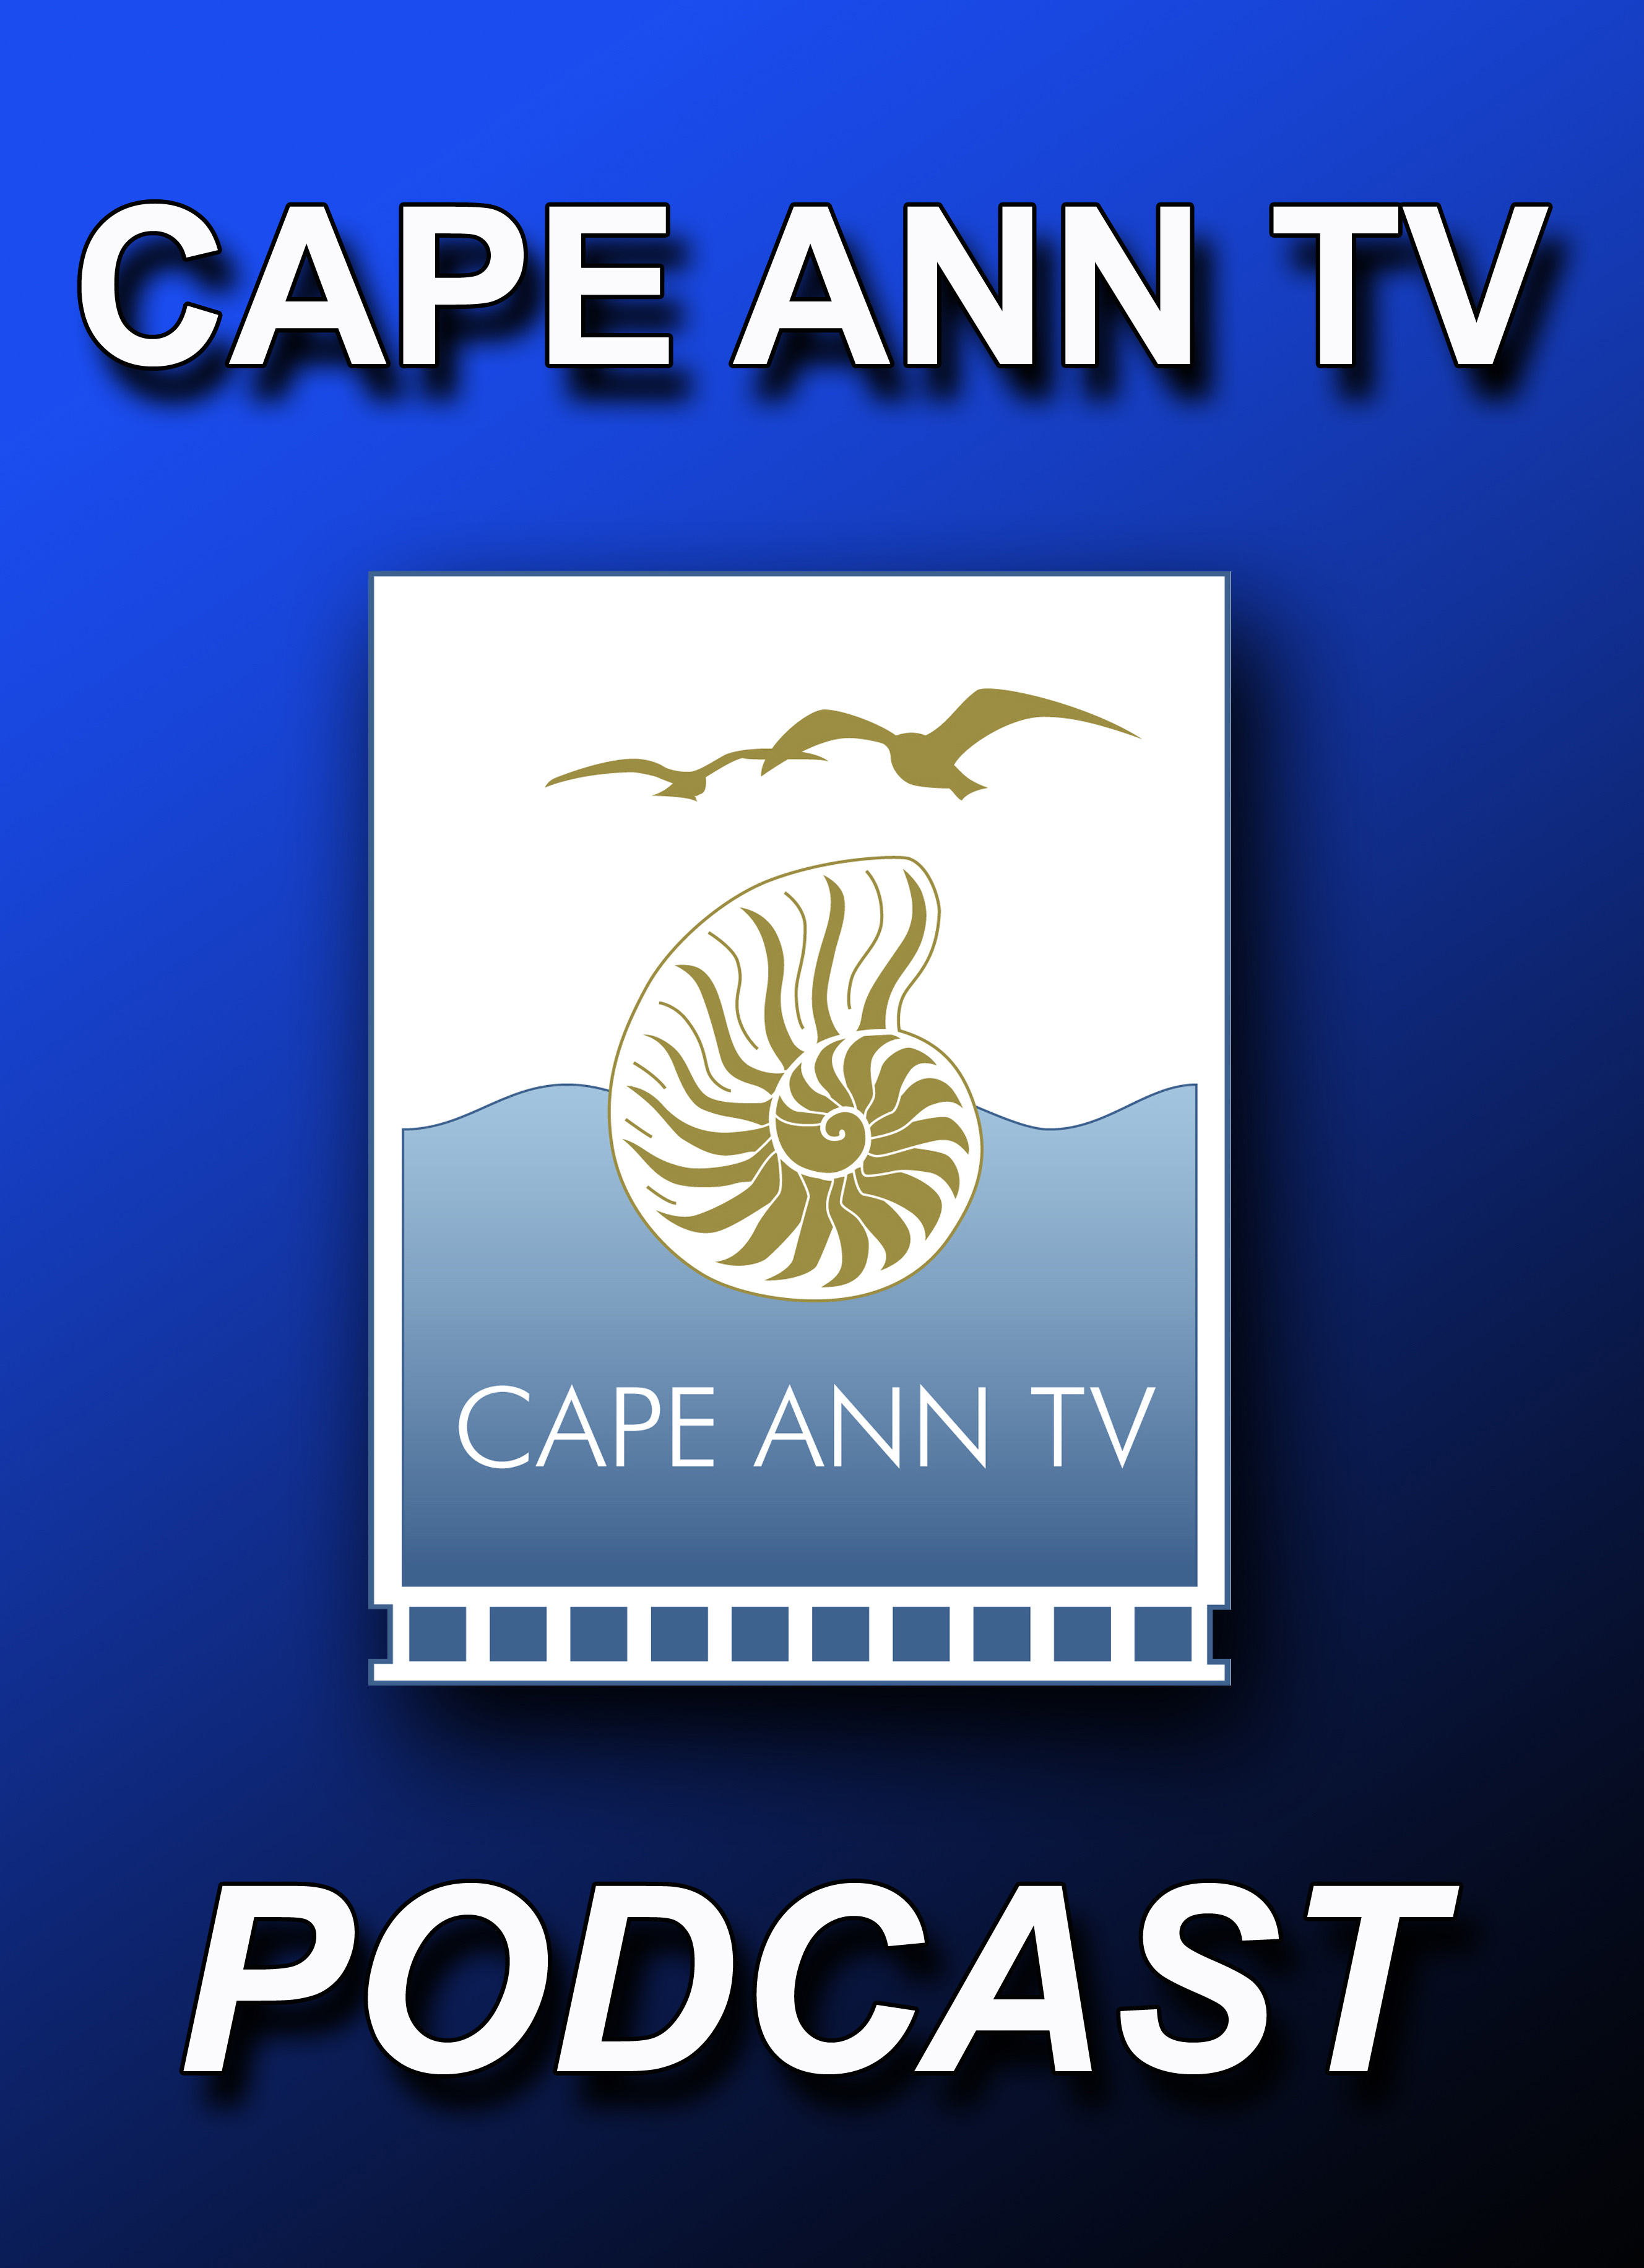 Gloucester Daily Times Podcast from Cape Ann TV Podcast Studio on July 27, 2016